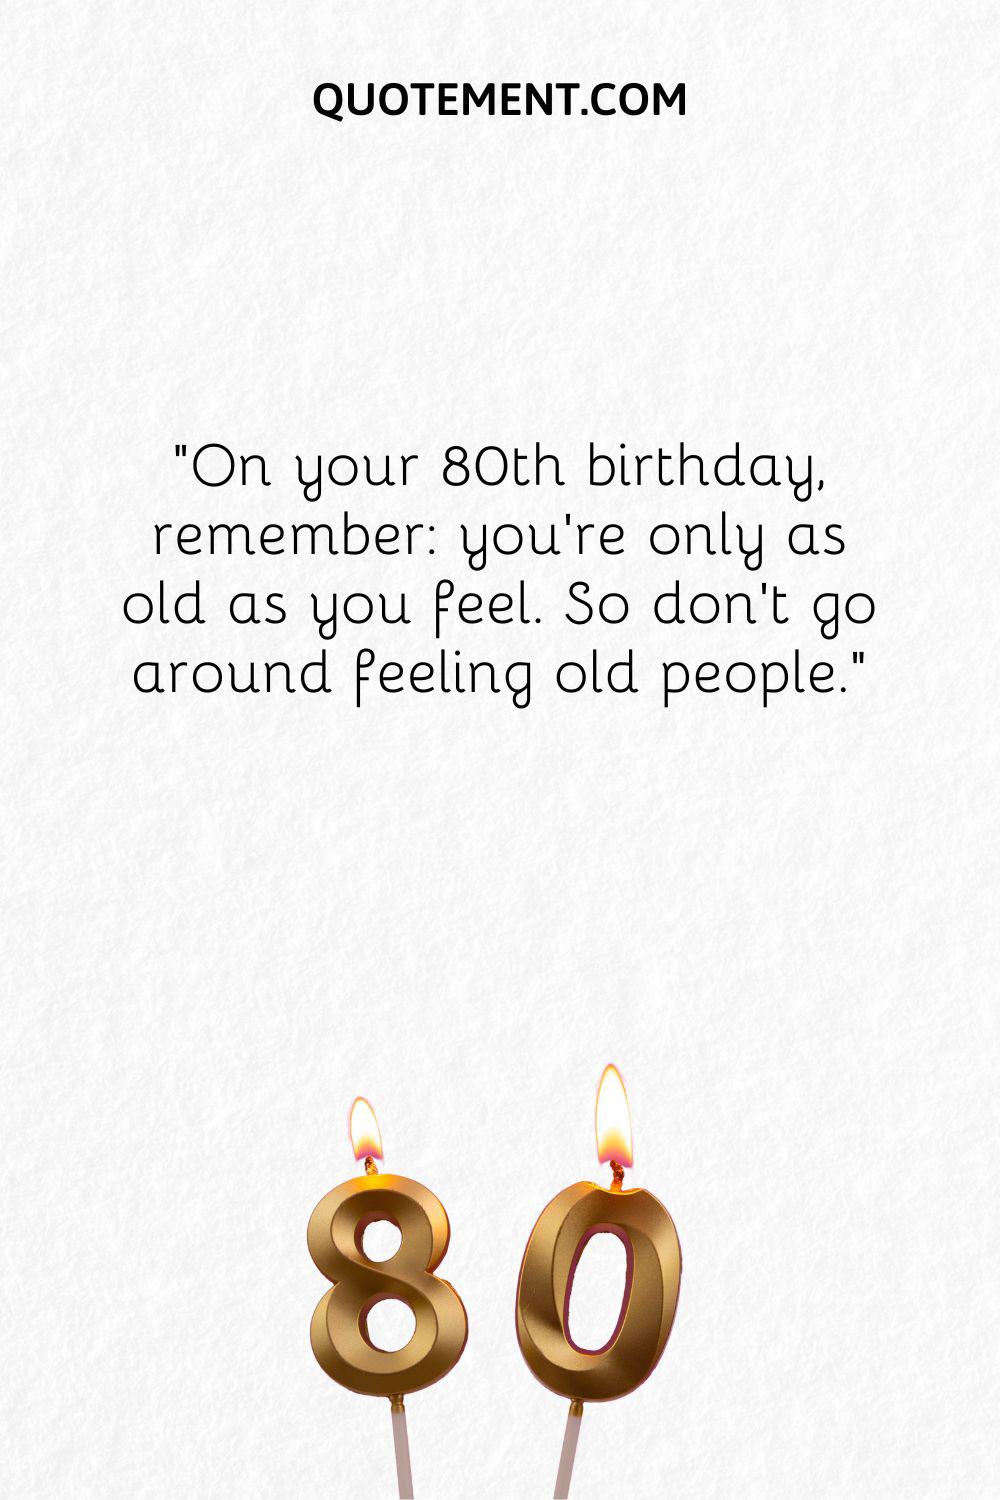 On youre 80th birthday, remember you’re only as old as you feel. So don’t go around feeling old people